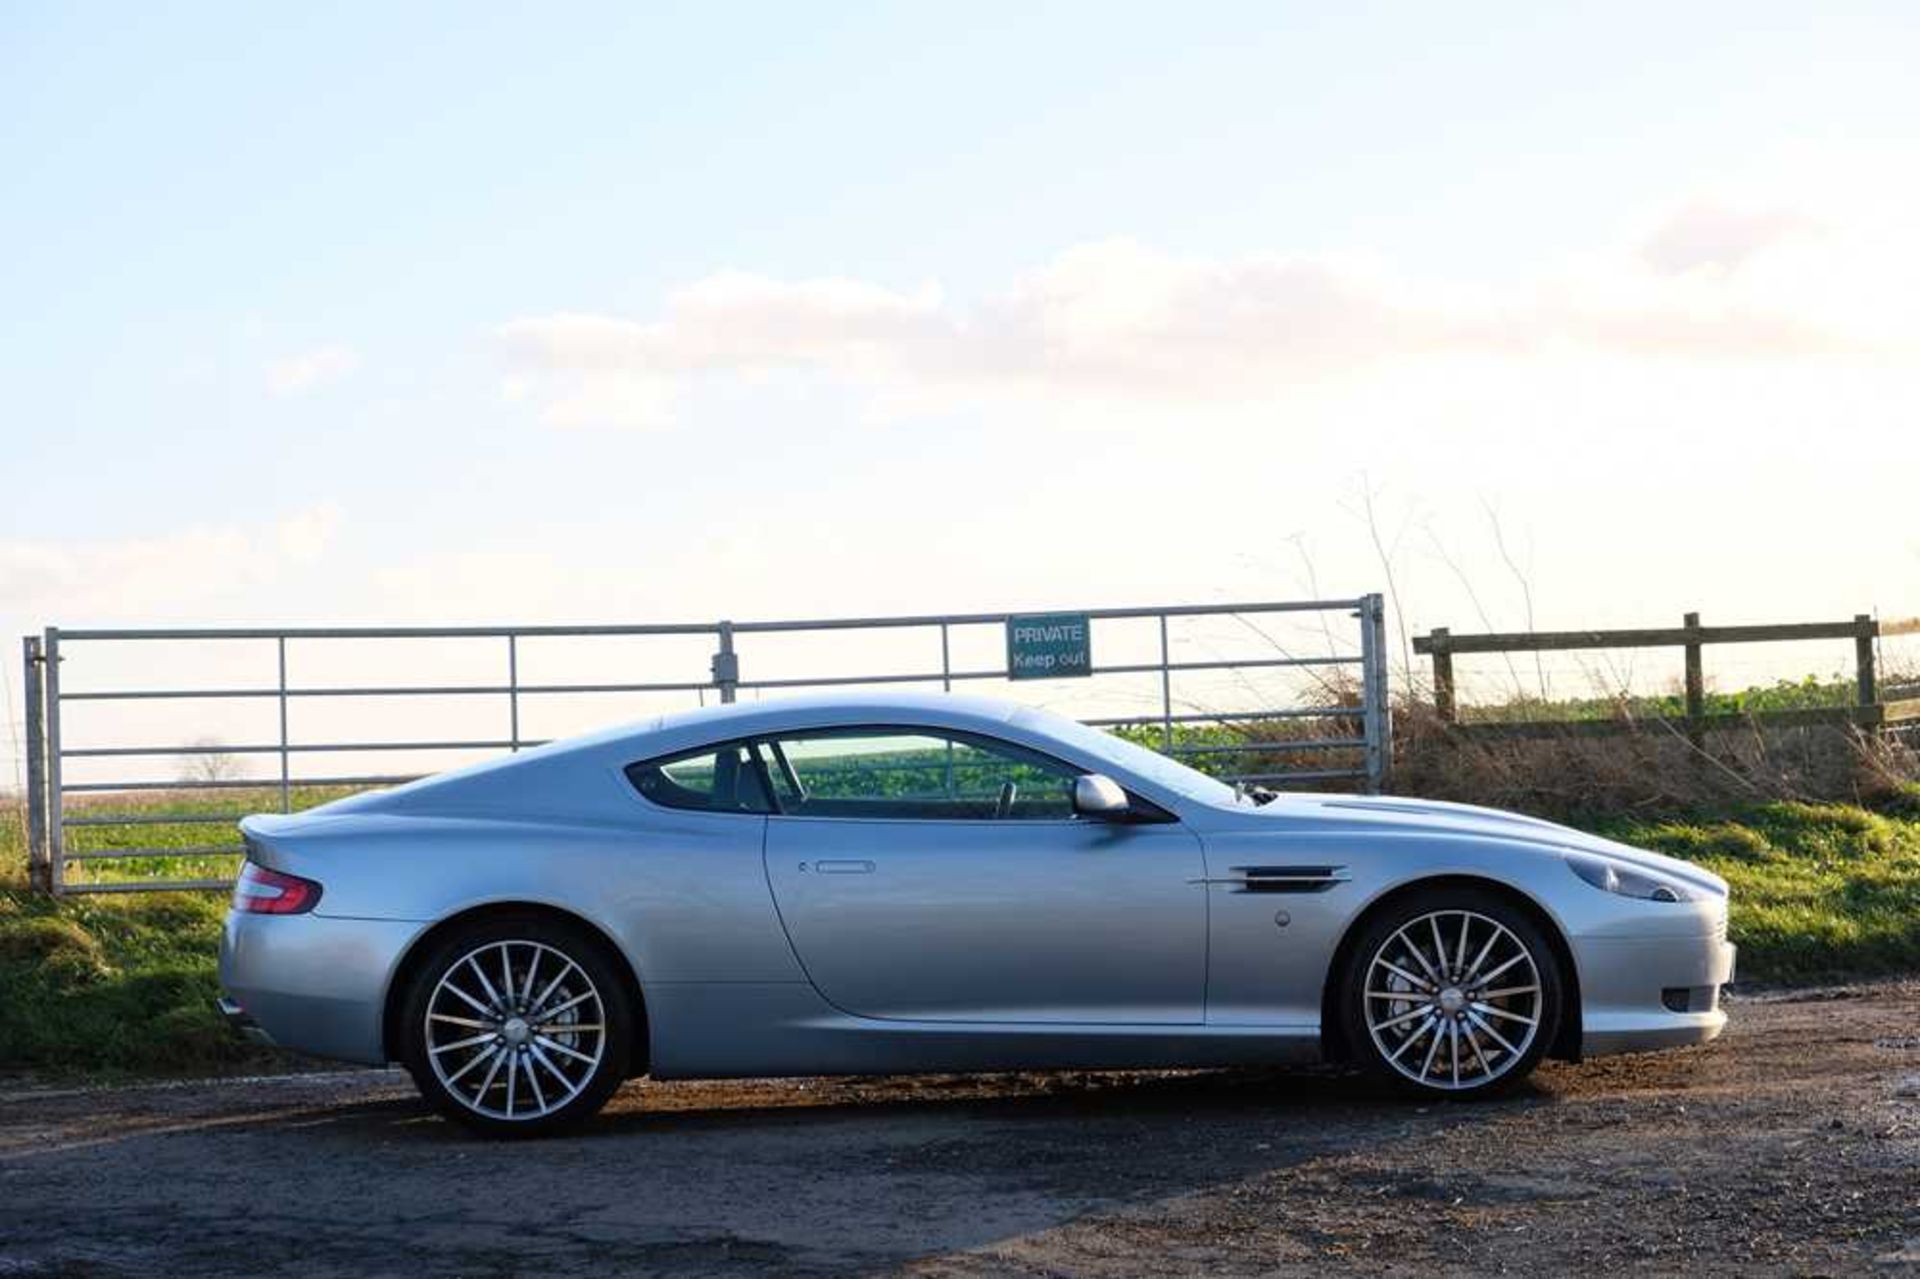 2005 Aston Martin DB9 c.25,000 from new and 4 former keepers - Image 23 of 59